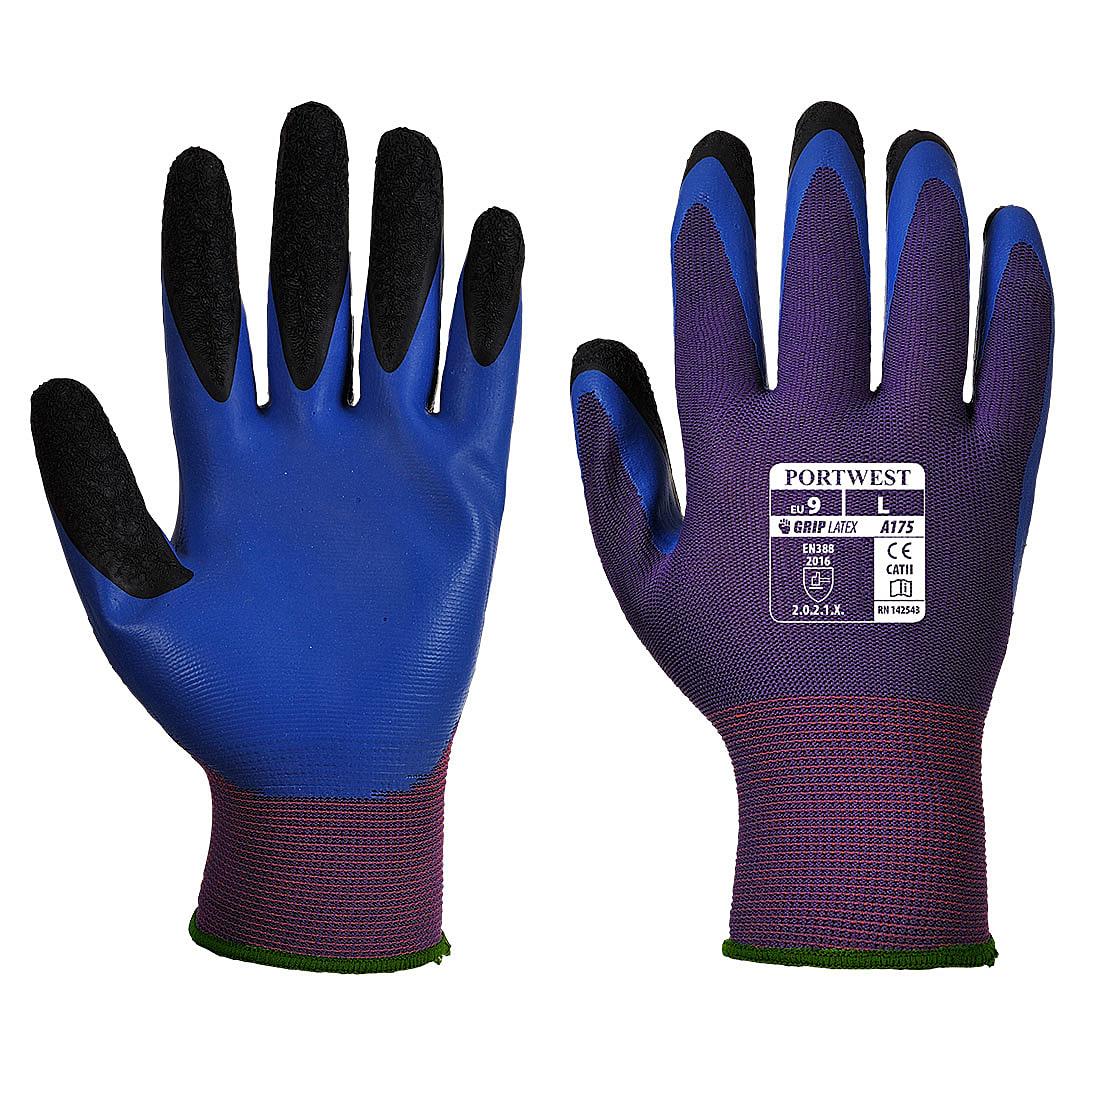 Portwest Duo-Flex Gloves in Purple / Blue (Product Code: A175)